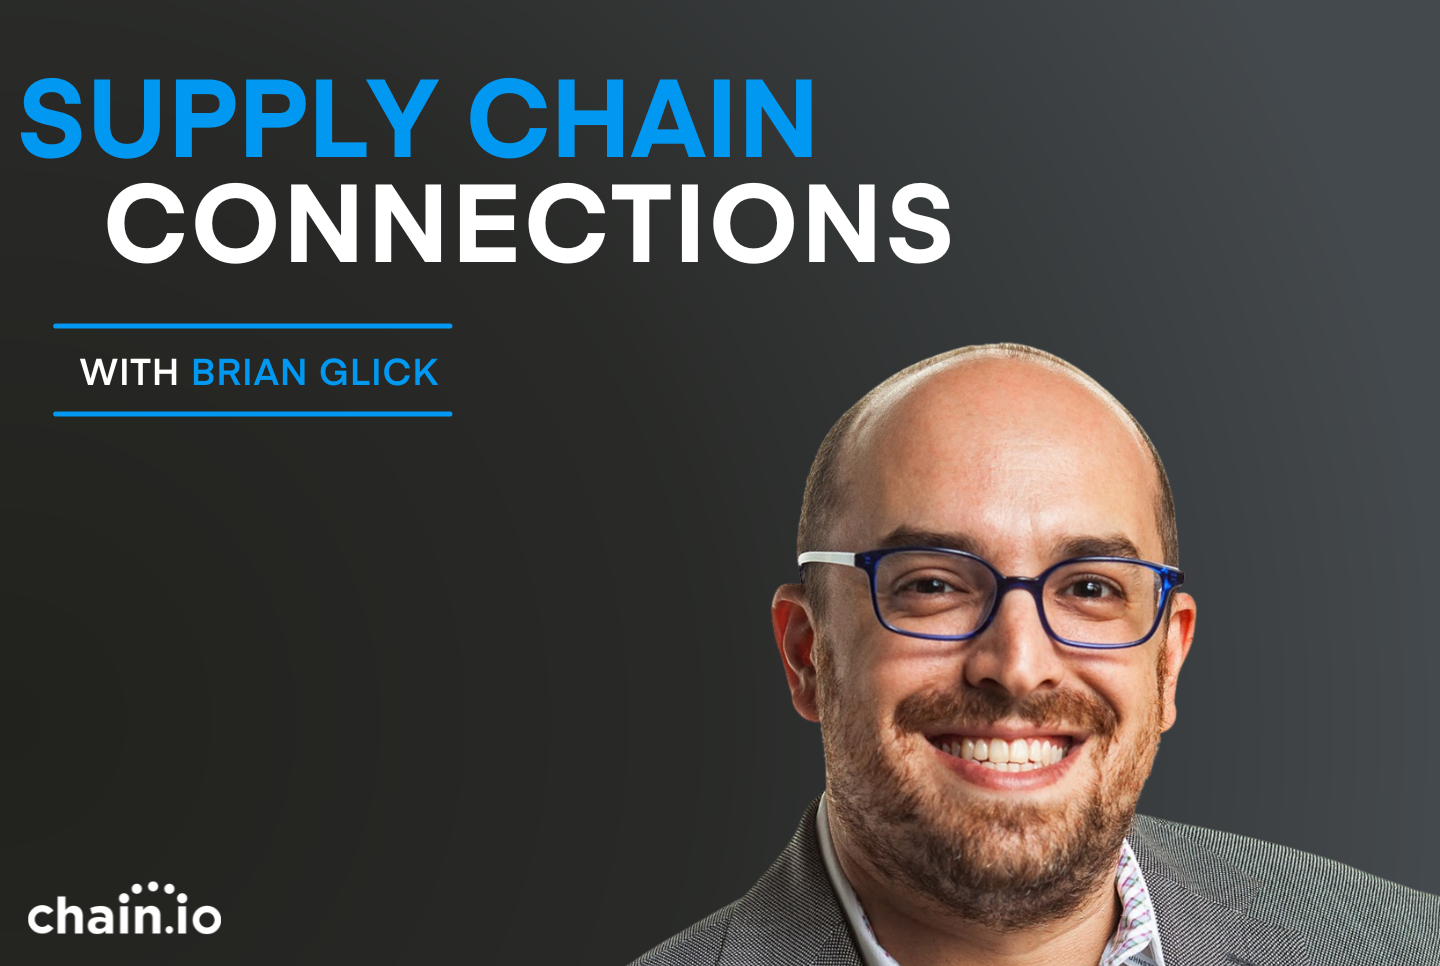 Supply Chain Connections Podcast with Brian Glick